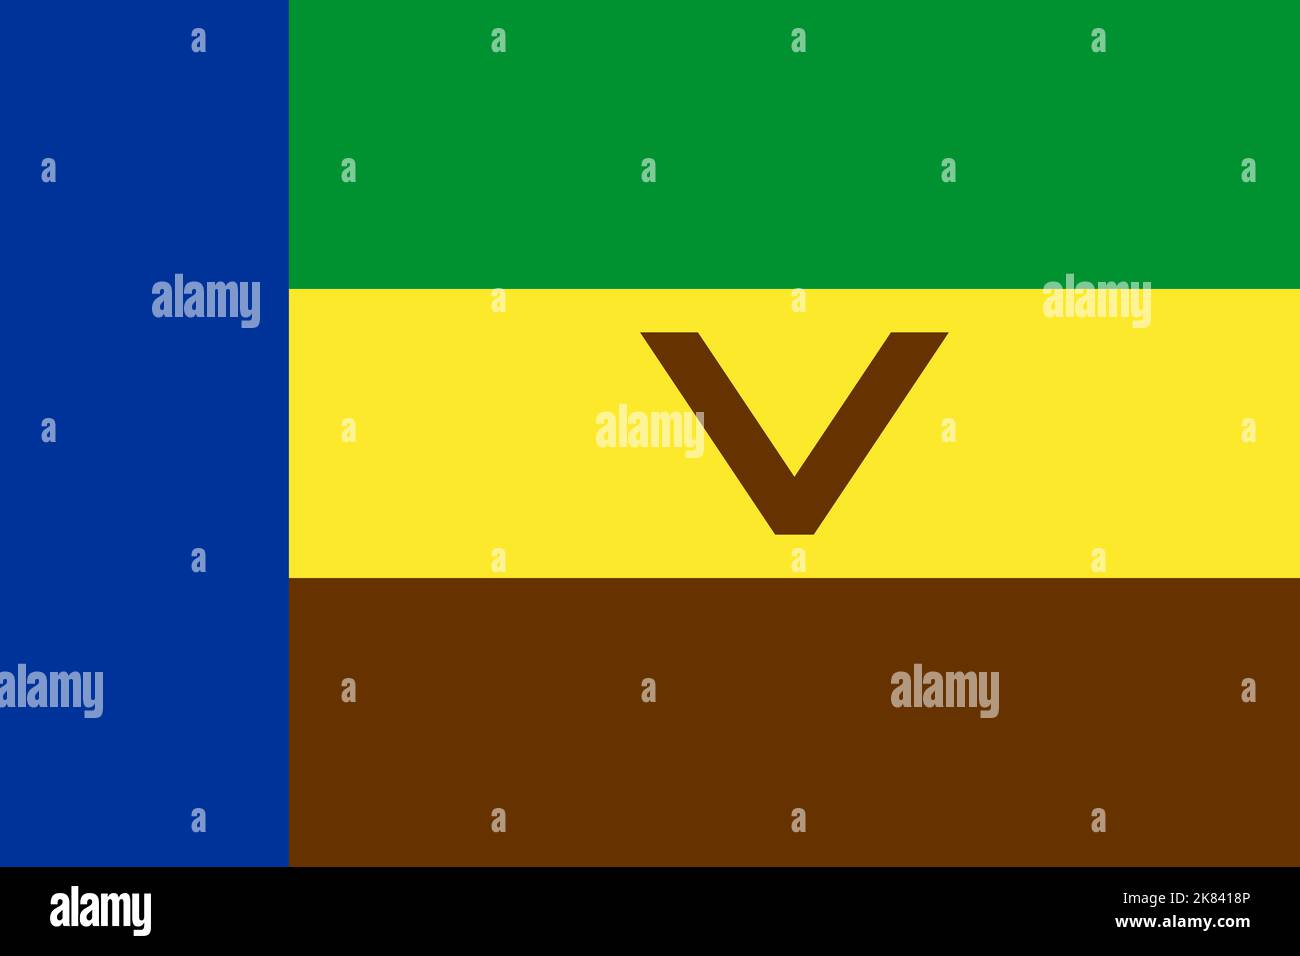 flag of Venda 1973 1994, africa. flag representing extinct country, ethnic group or culture, regional authorities. no flagpole. Plane design, layout Stock Photo